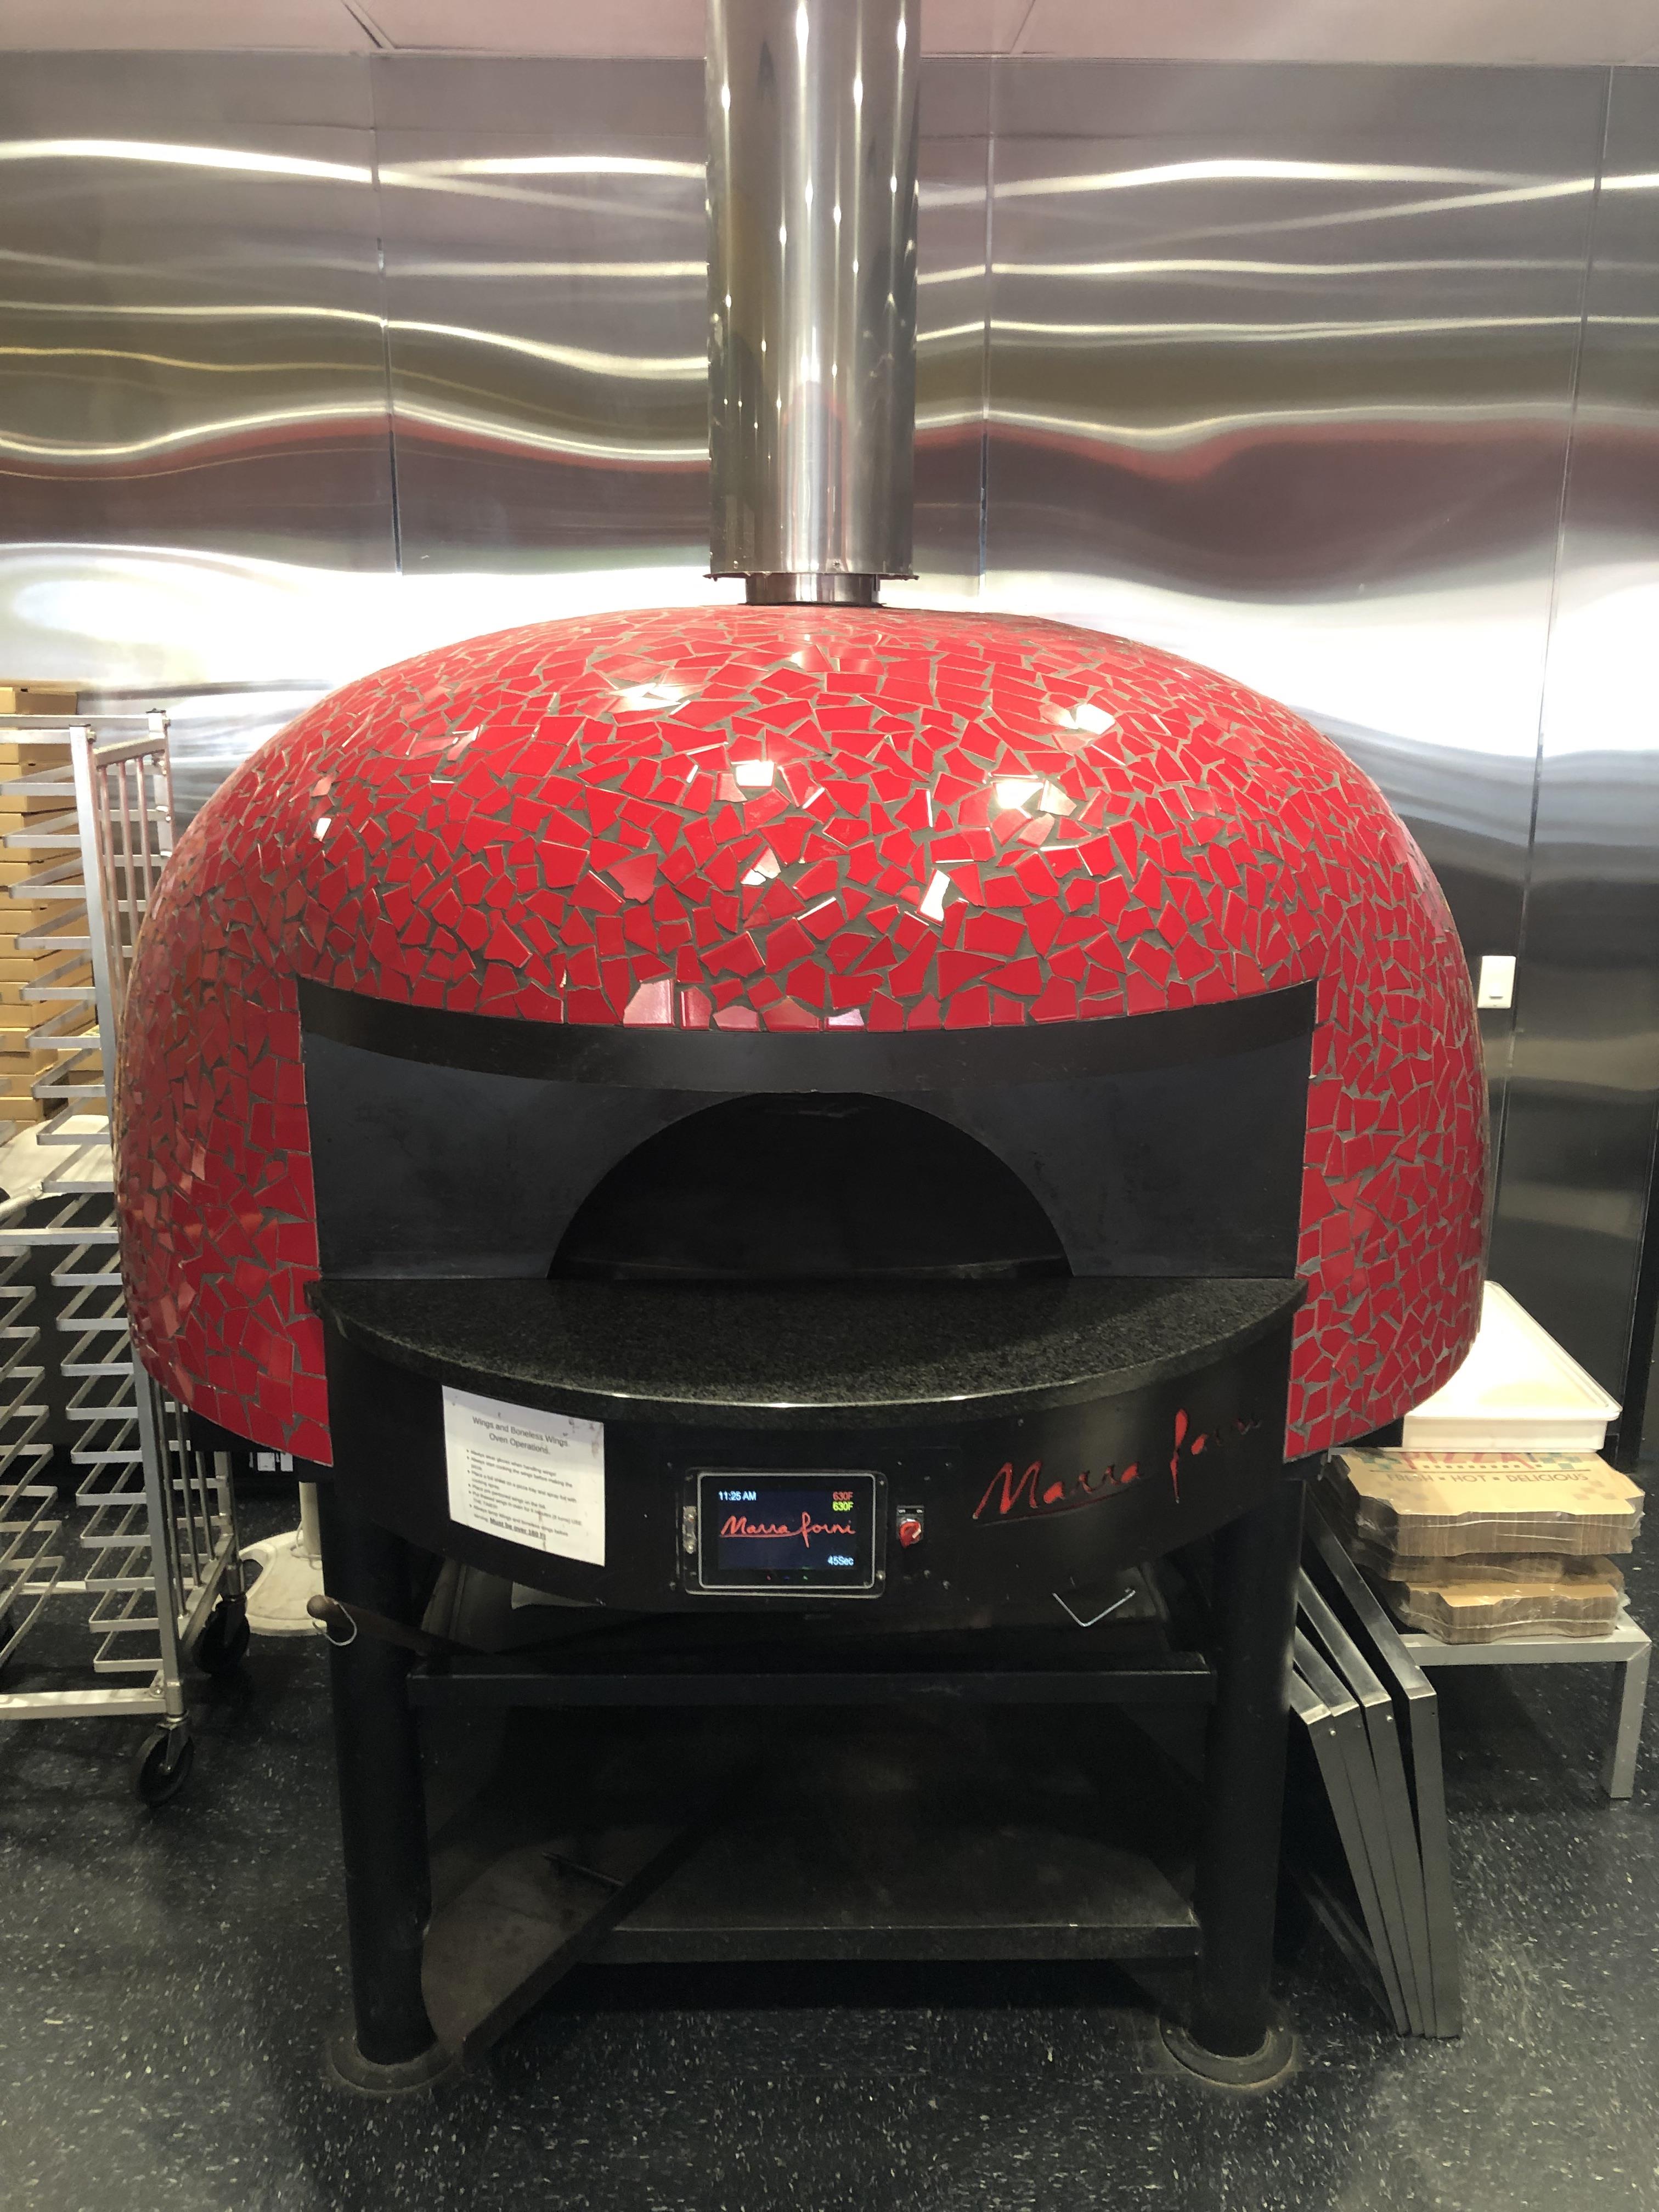 Marra Forni Model Rt150g Pizza Oven Like New Original Cost 40kremoval Assistance And Shipping Is 2734